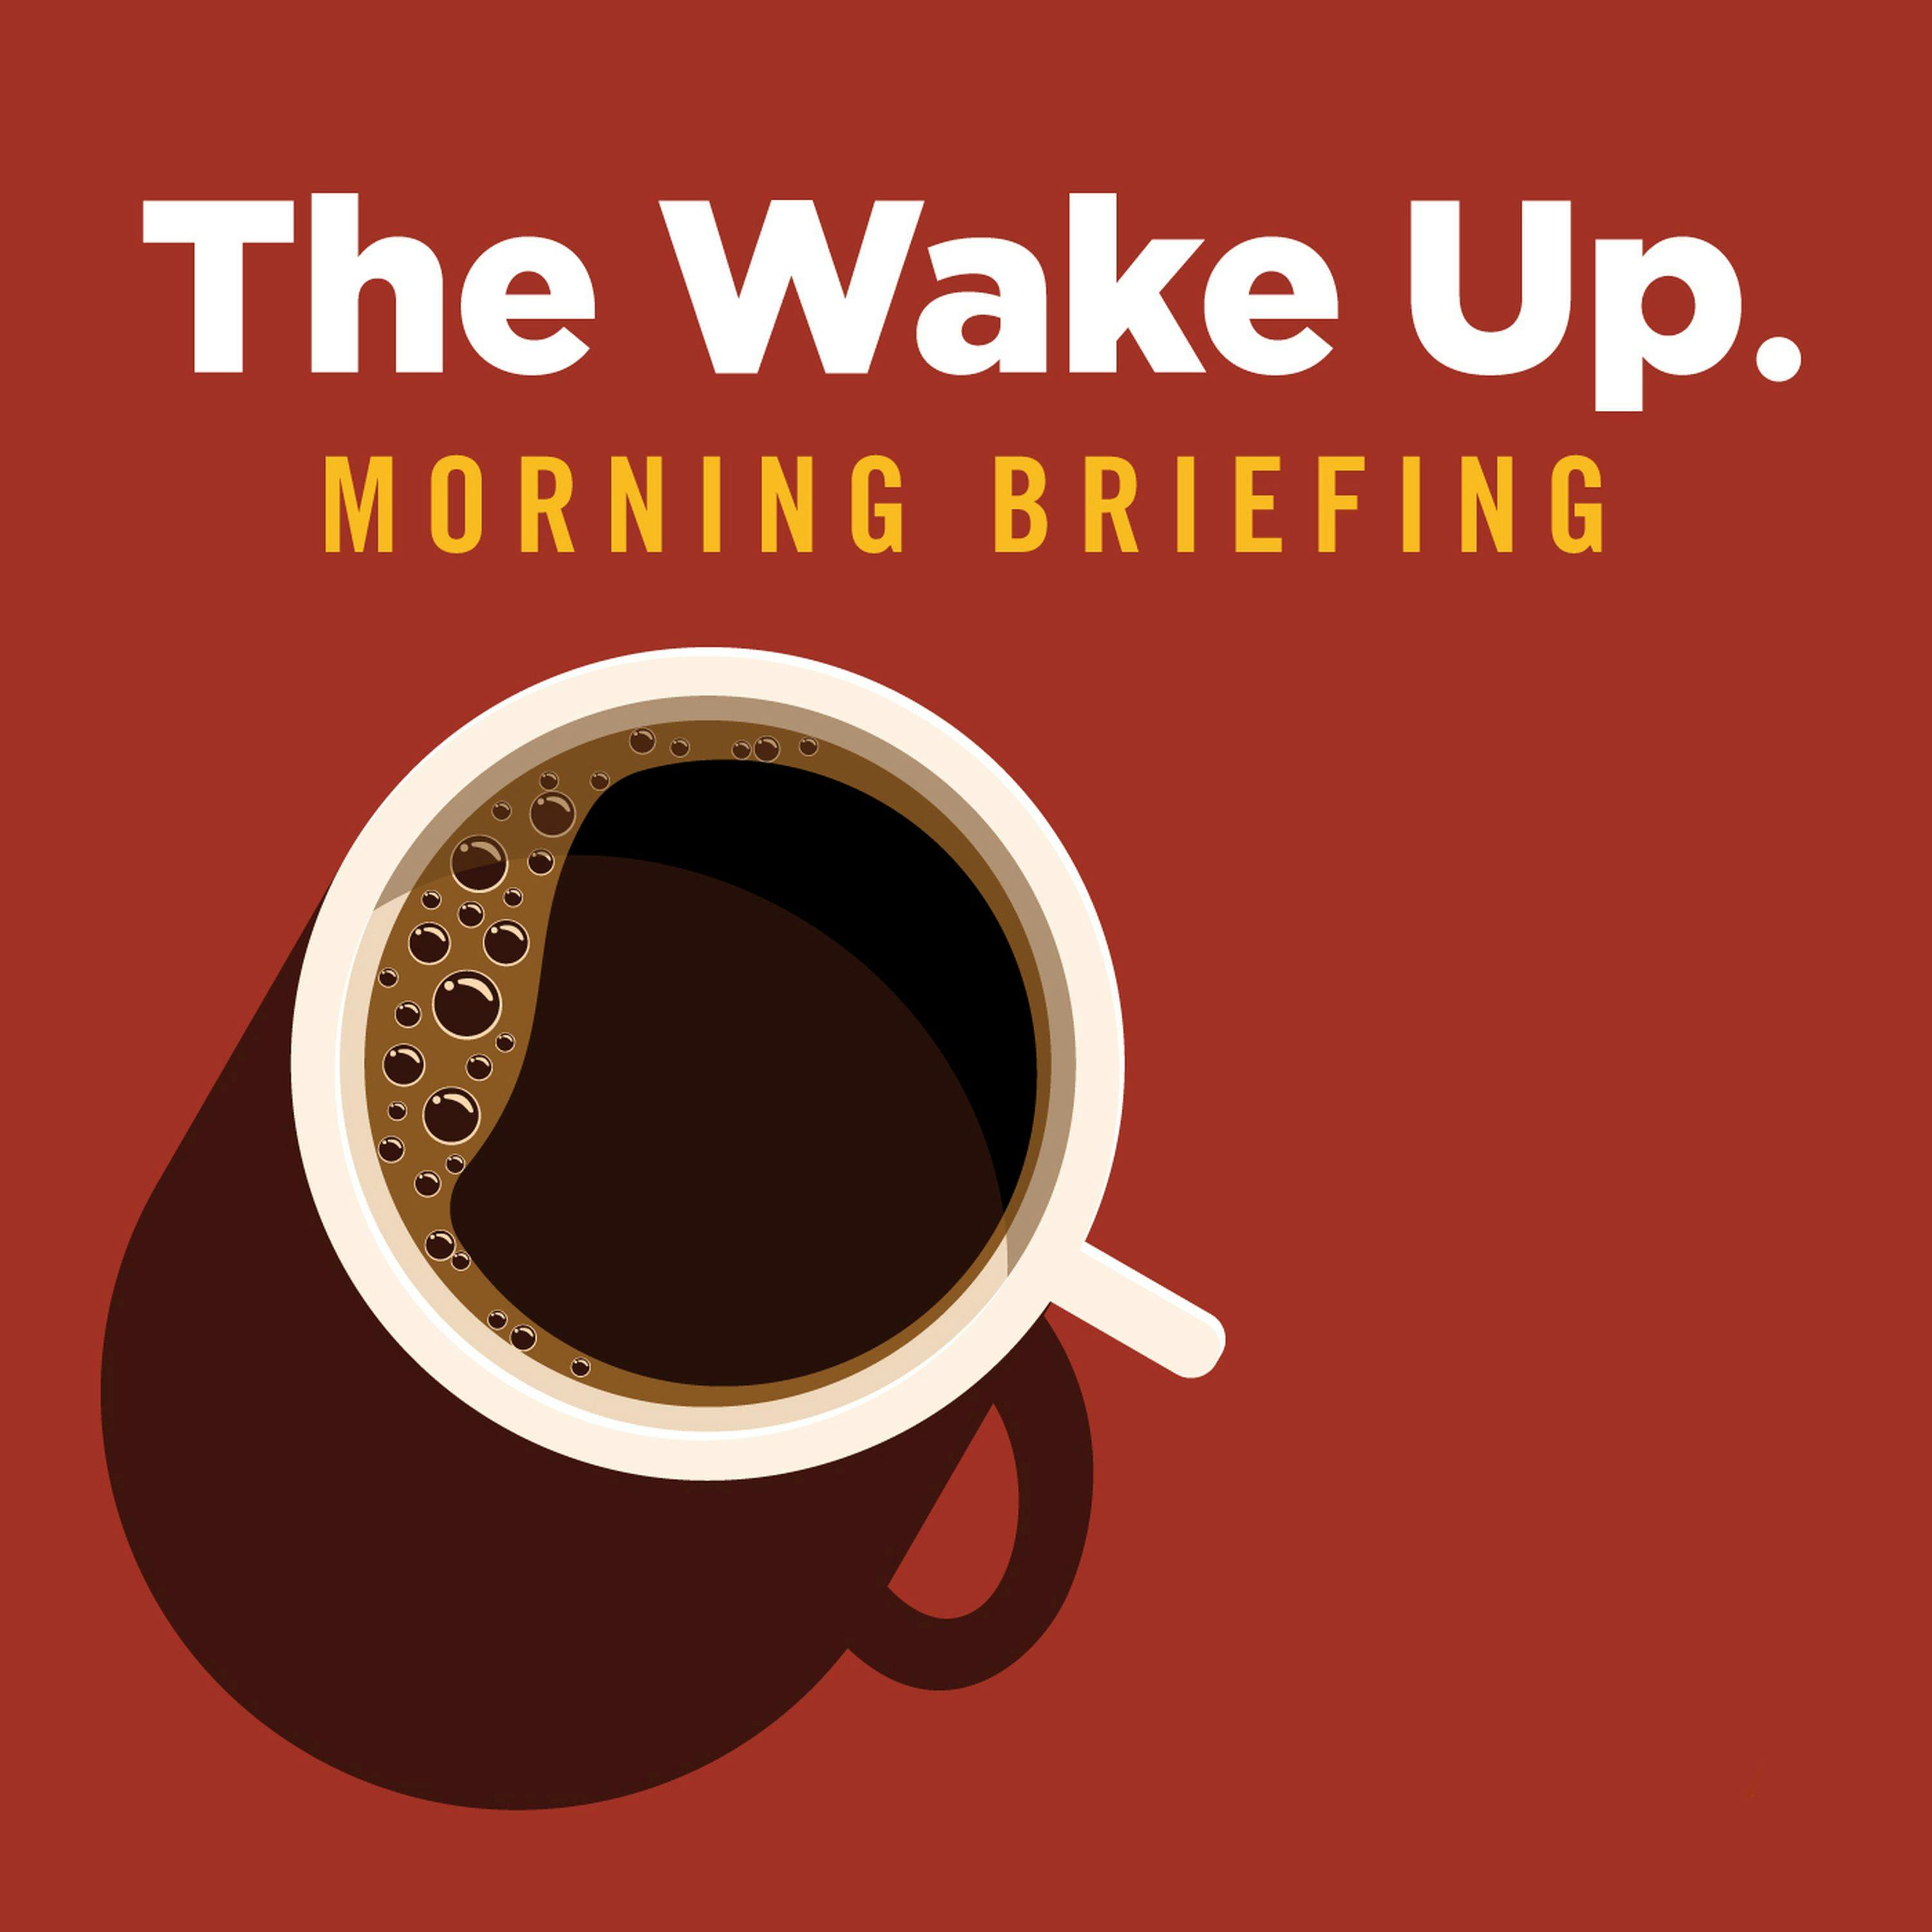 The Wake Up - March 4, 2021 Cuyahoga County Executive Armond Budish digs in on his claim to full power over the county sheriff